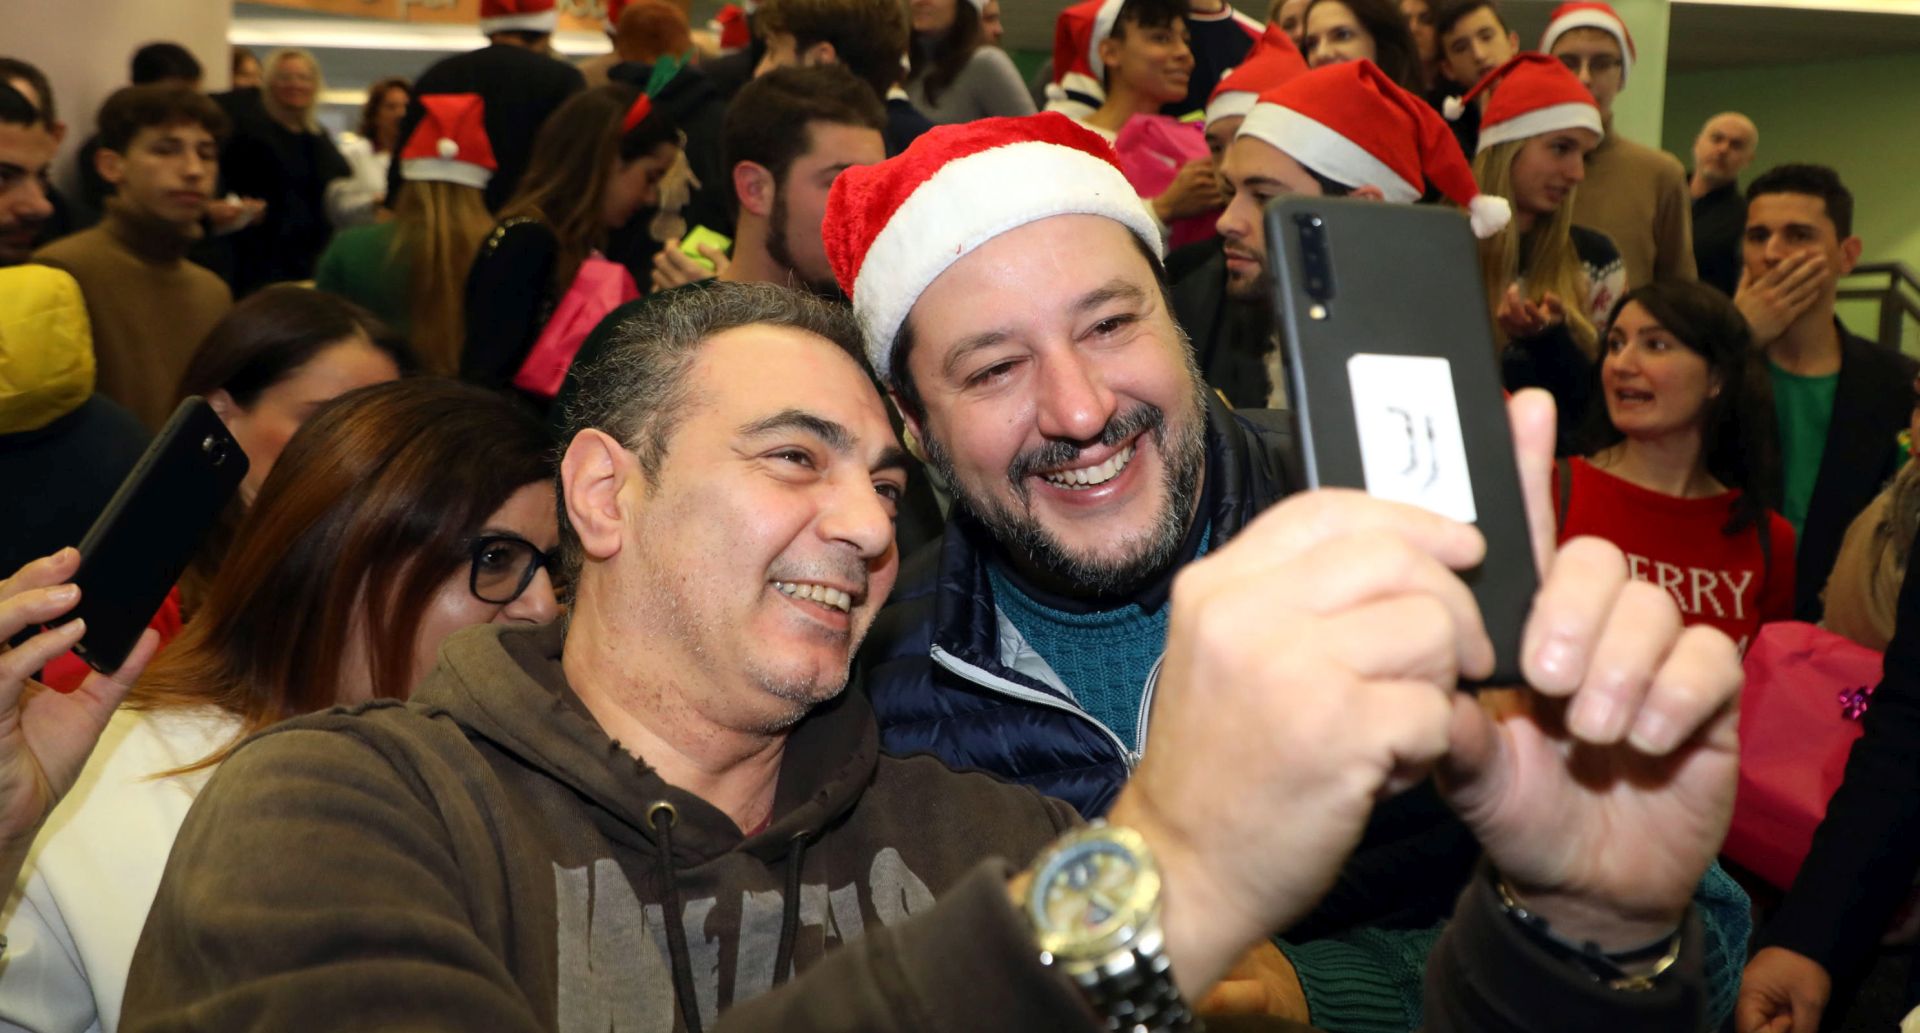 epa08088827 Italy's League party leader Matteo Salvini, wearing a Santa hat, poses for a selfie during a visit at the Buzzi hospital where he distributed gifts to hospitalized children, in Milan, northern Italy, 24 December 2019.  EPA/MATTEO BAZZI